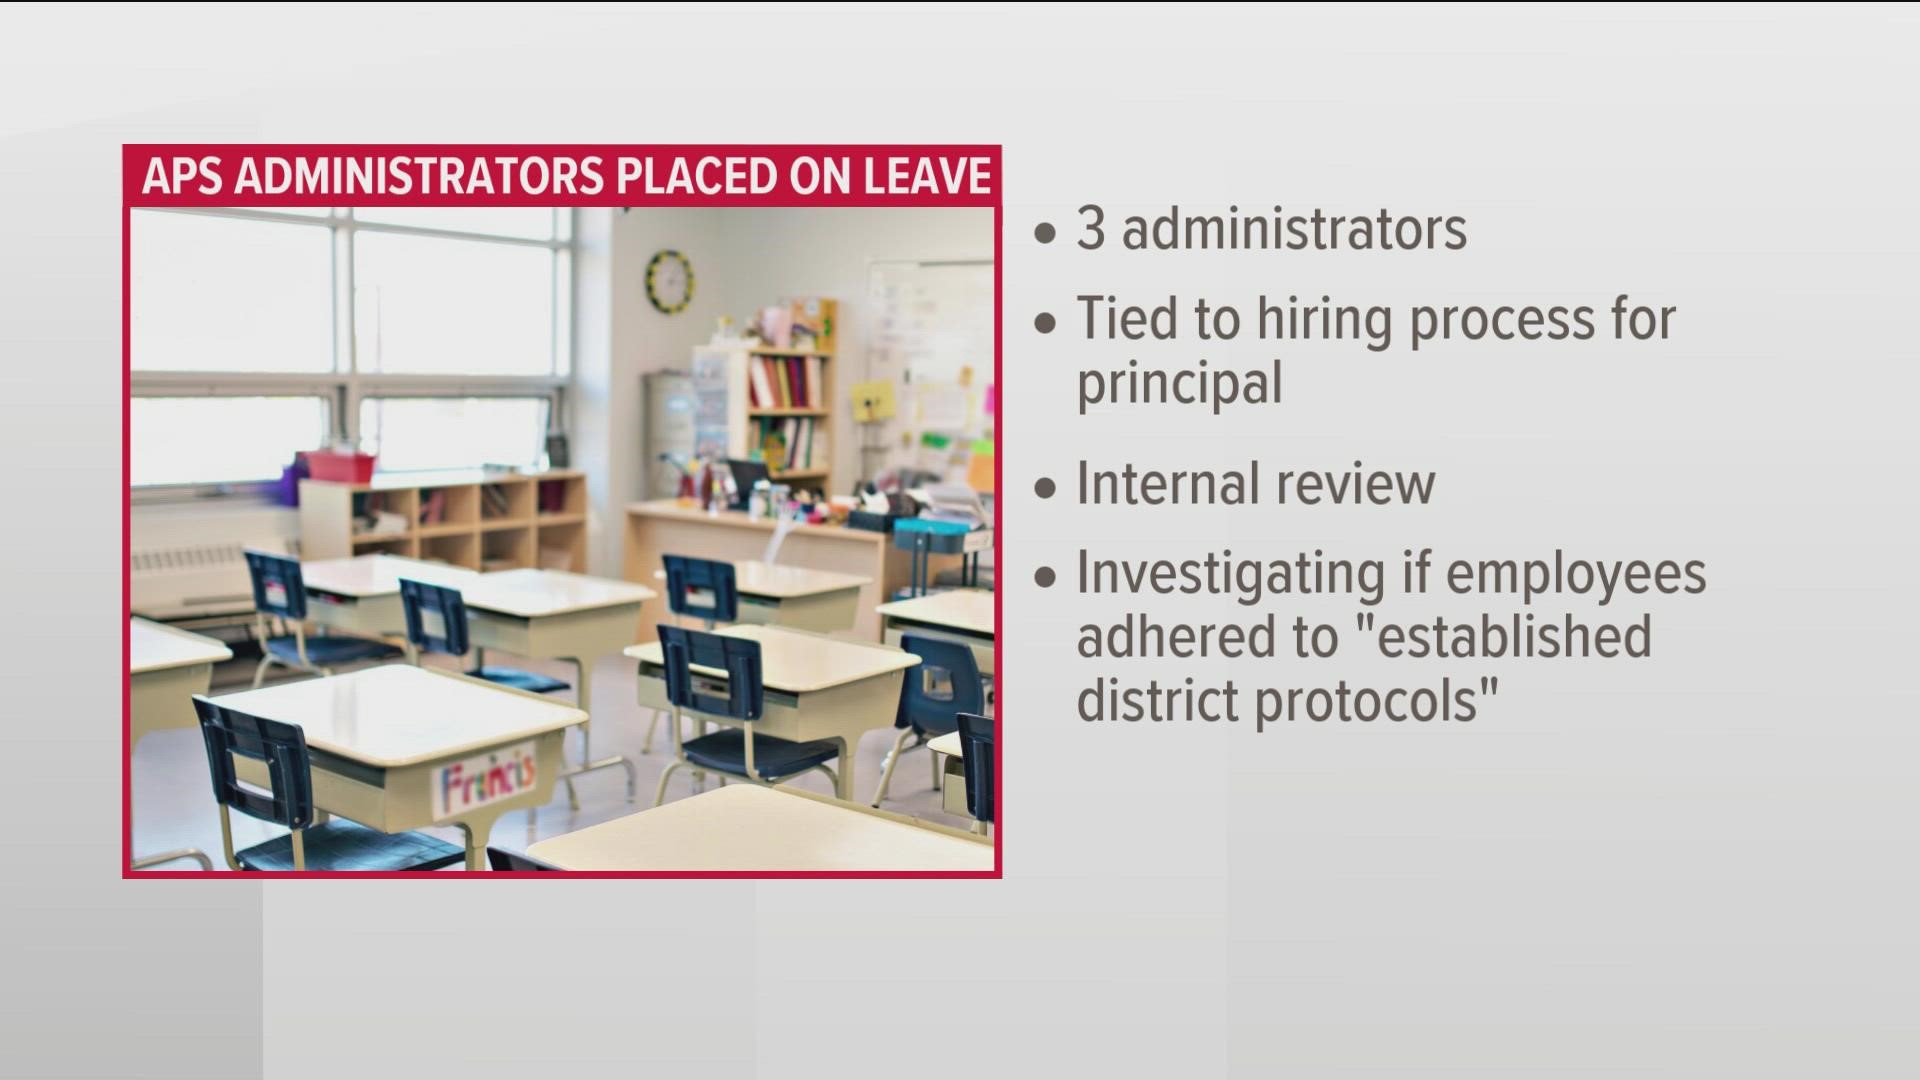 They are being investigated to see if they adhered to "established district protocols."